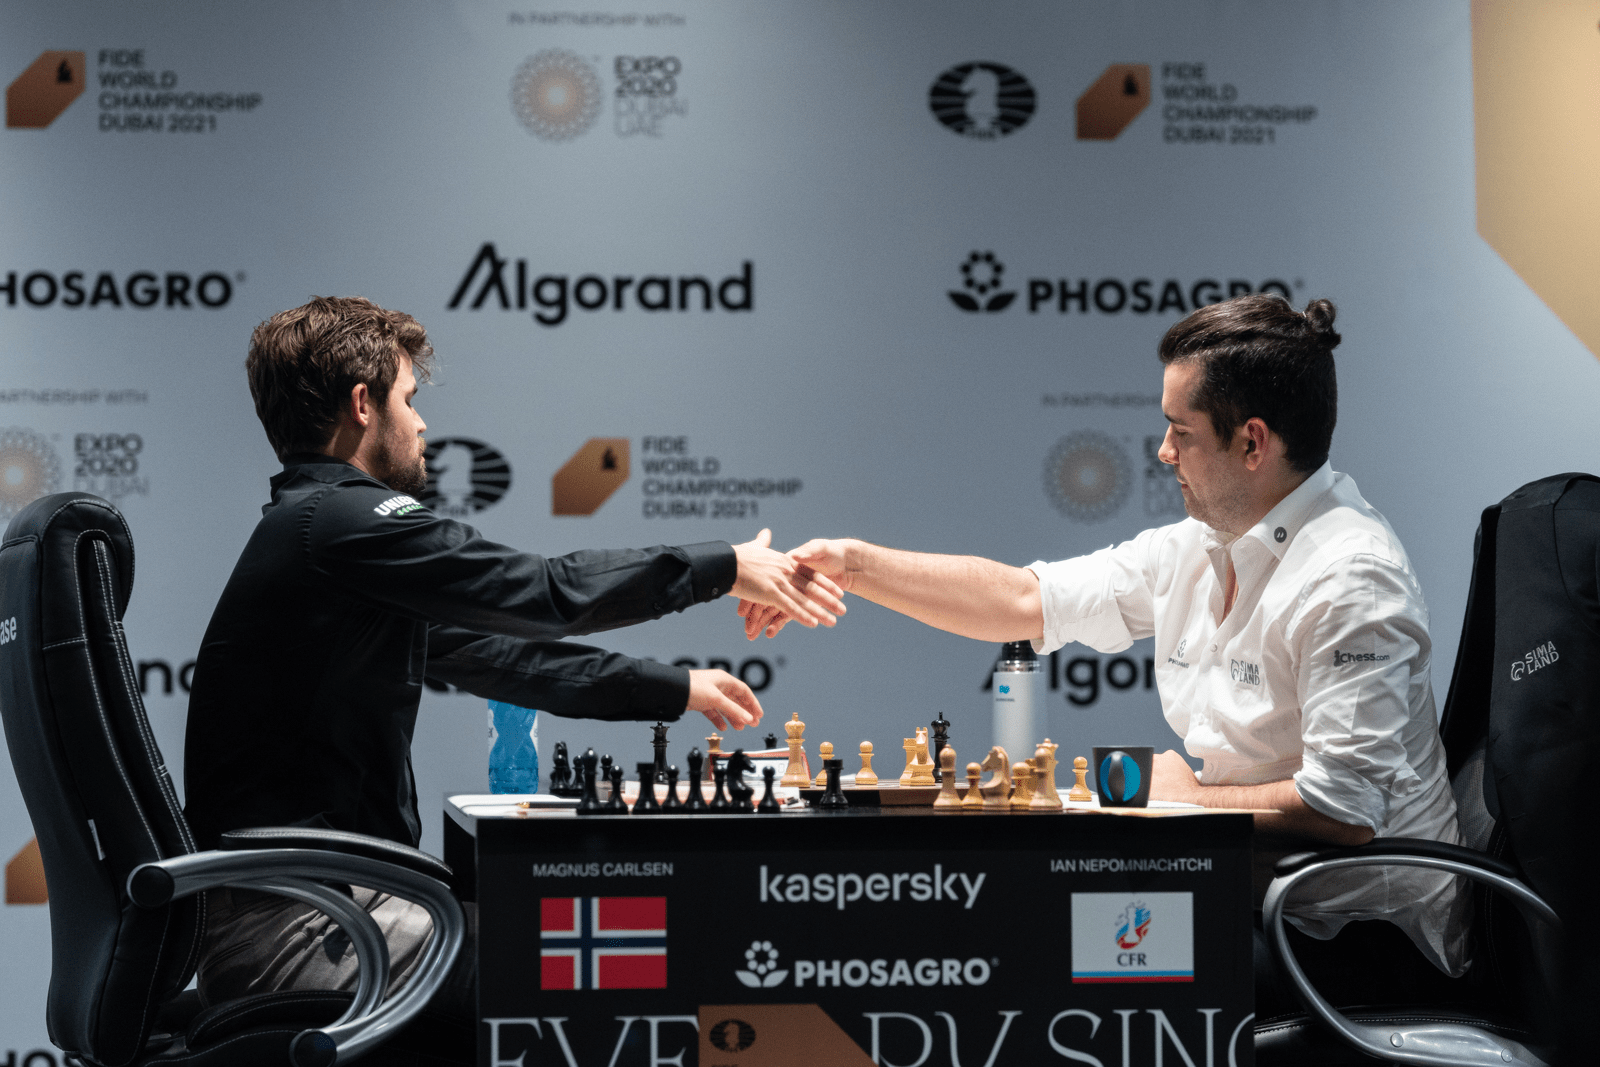 Magnus Carlsen won the sixth game against Ian Nepomniachtchi after almost 8 hours of play and 136 moves. Photo: Maria Emelianova/Chess.com